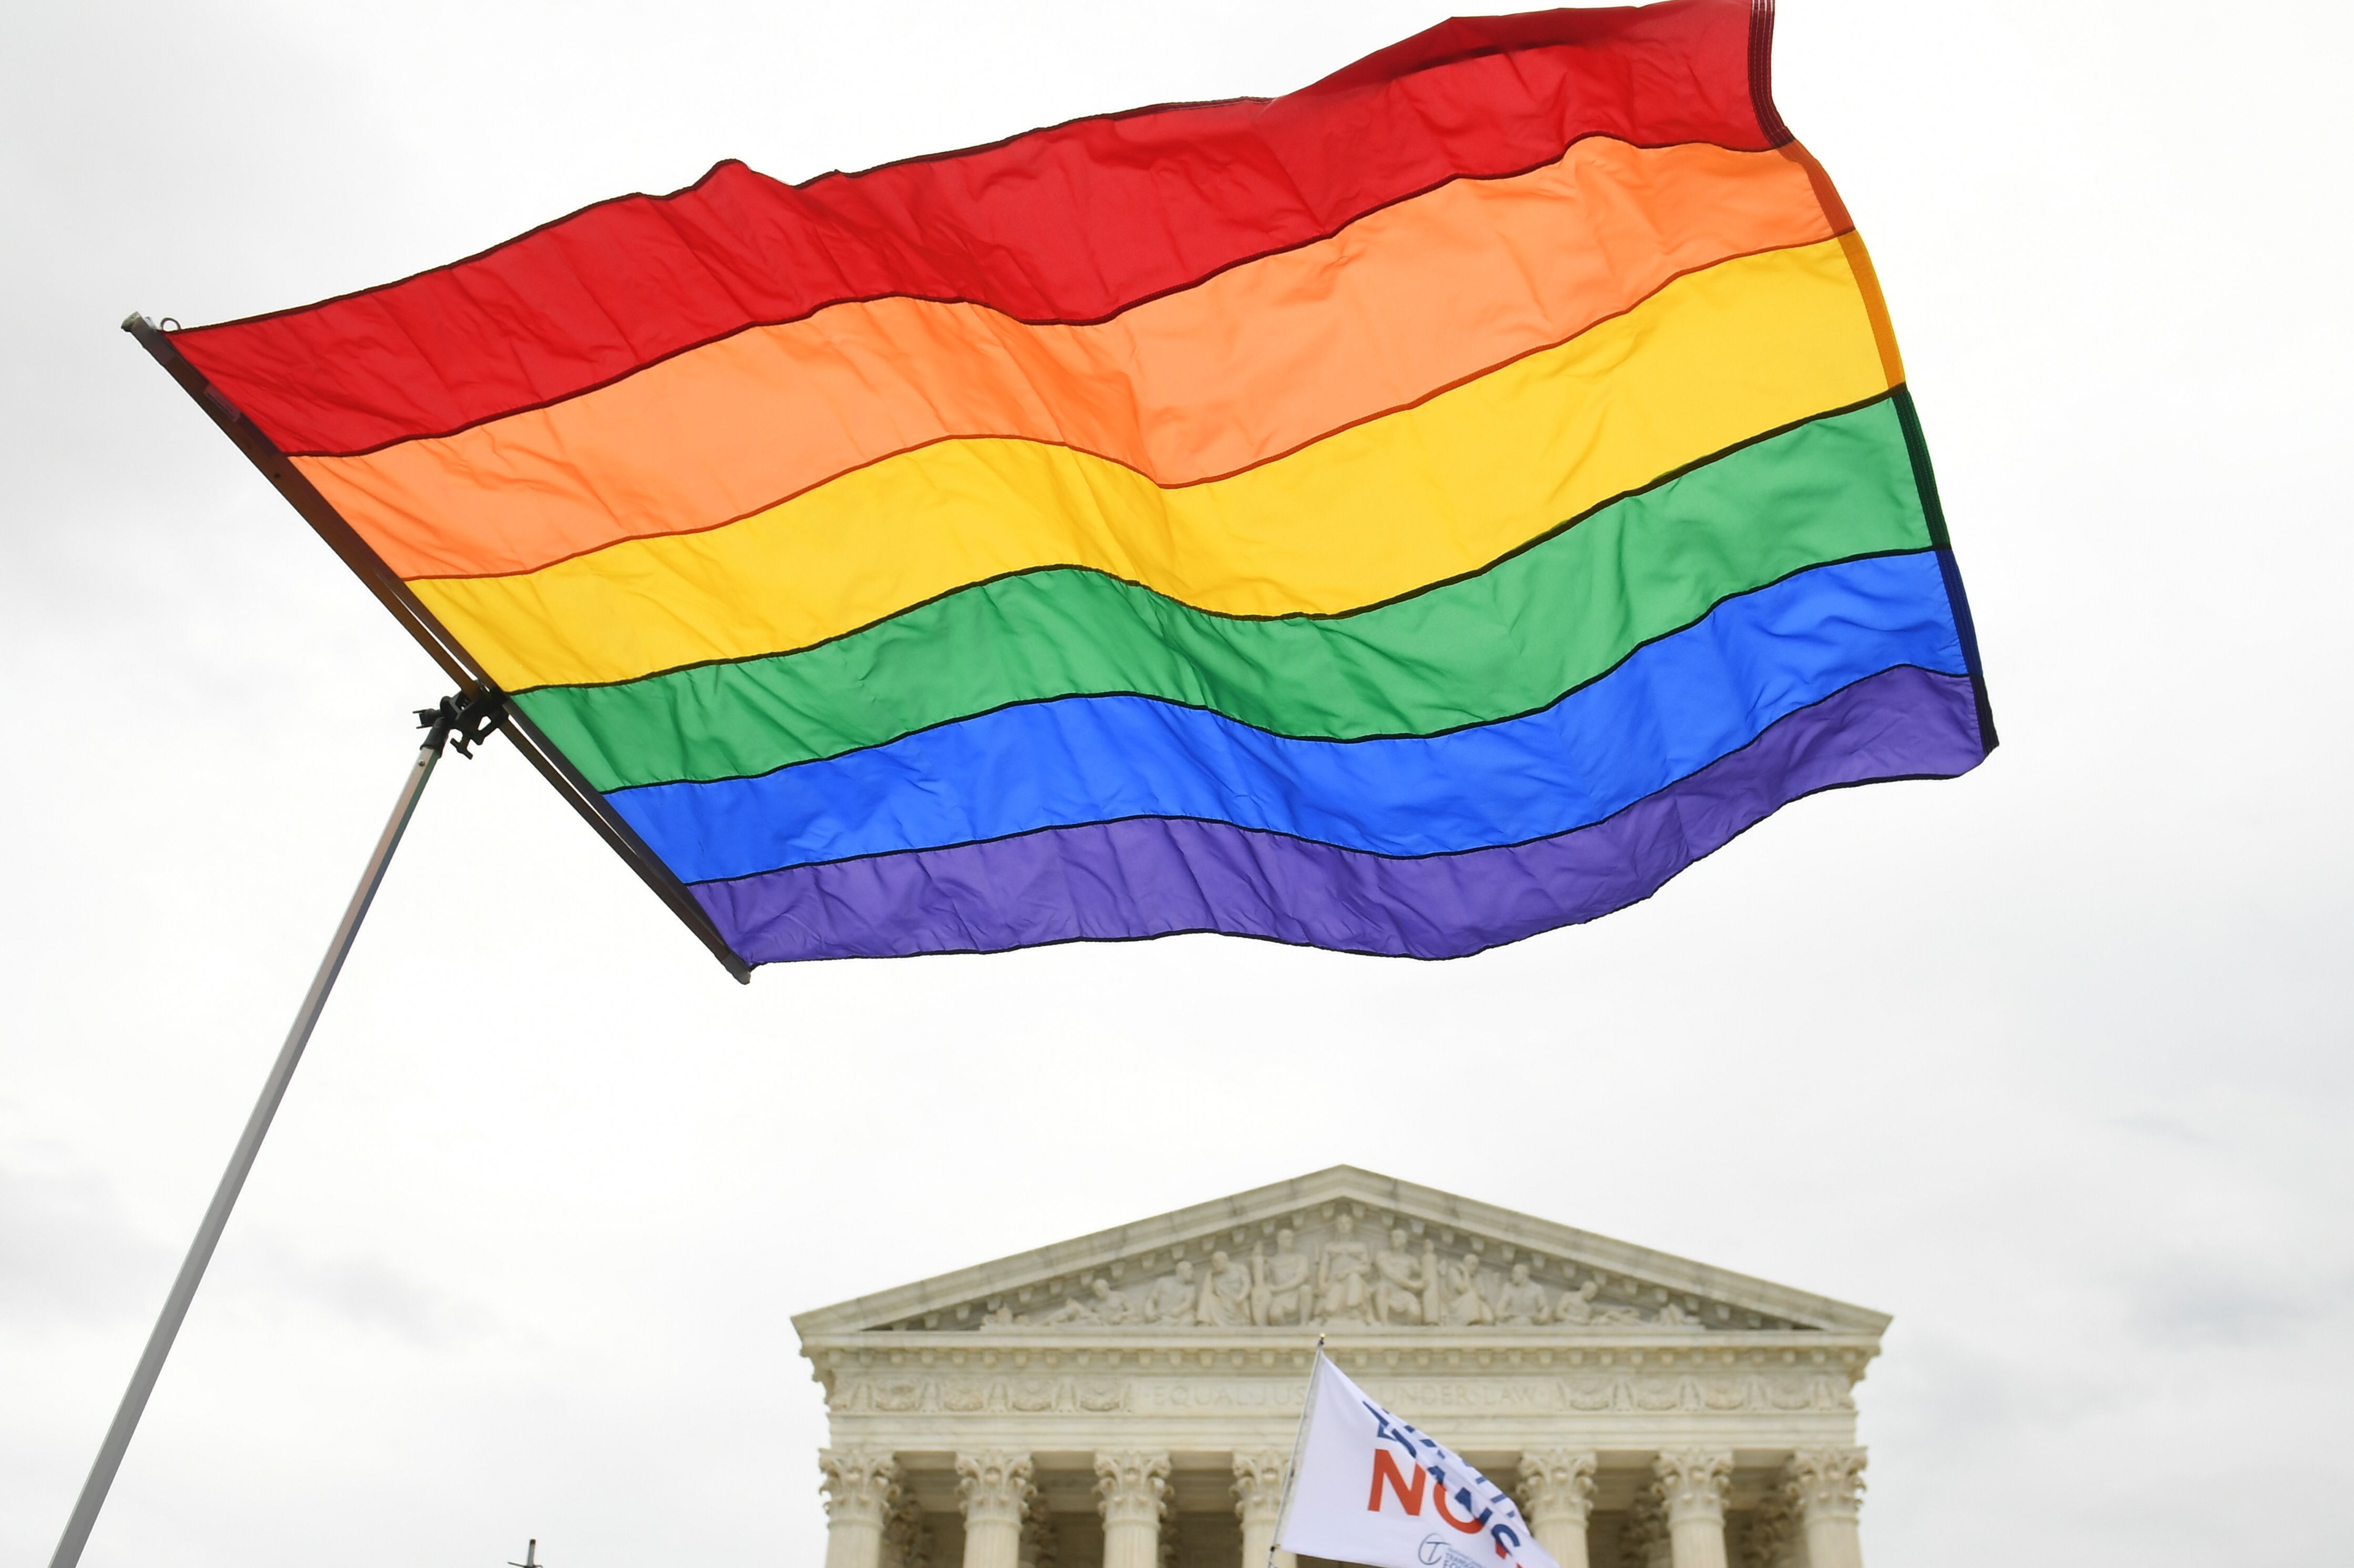 Demonstrators in favour of LGBT rights rally outside the US Supreme Court in Washington, DC, October 8, 2019, as the Court holds oral arguments in three cases dealing with workplace discrimination based on sexual orientation. (Photo by SAUL LOEB / AFP) (Photo by SAUL LOEB/AFP via Getty Images)